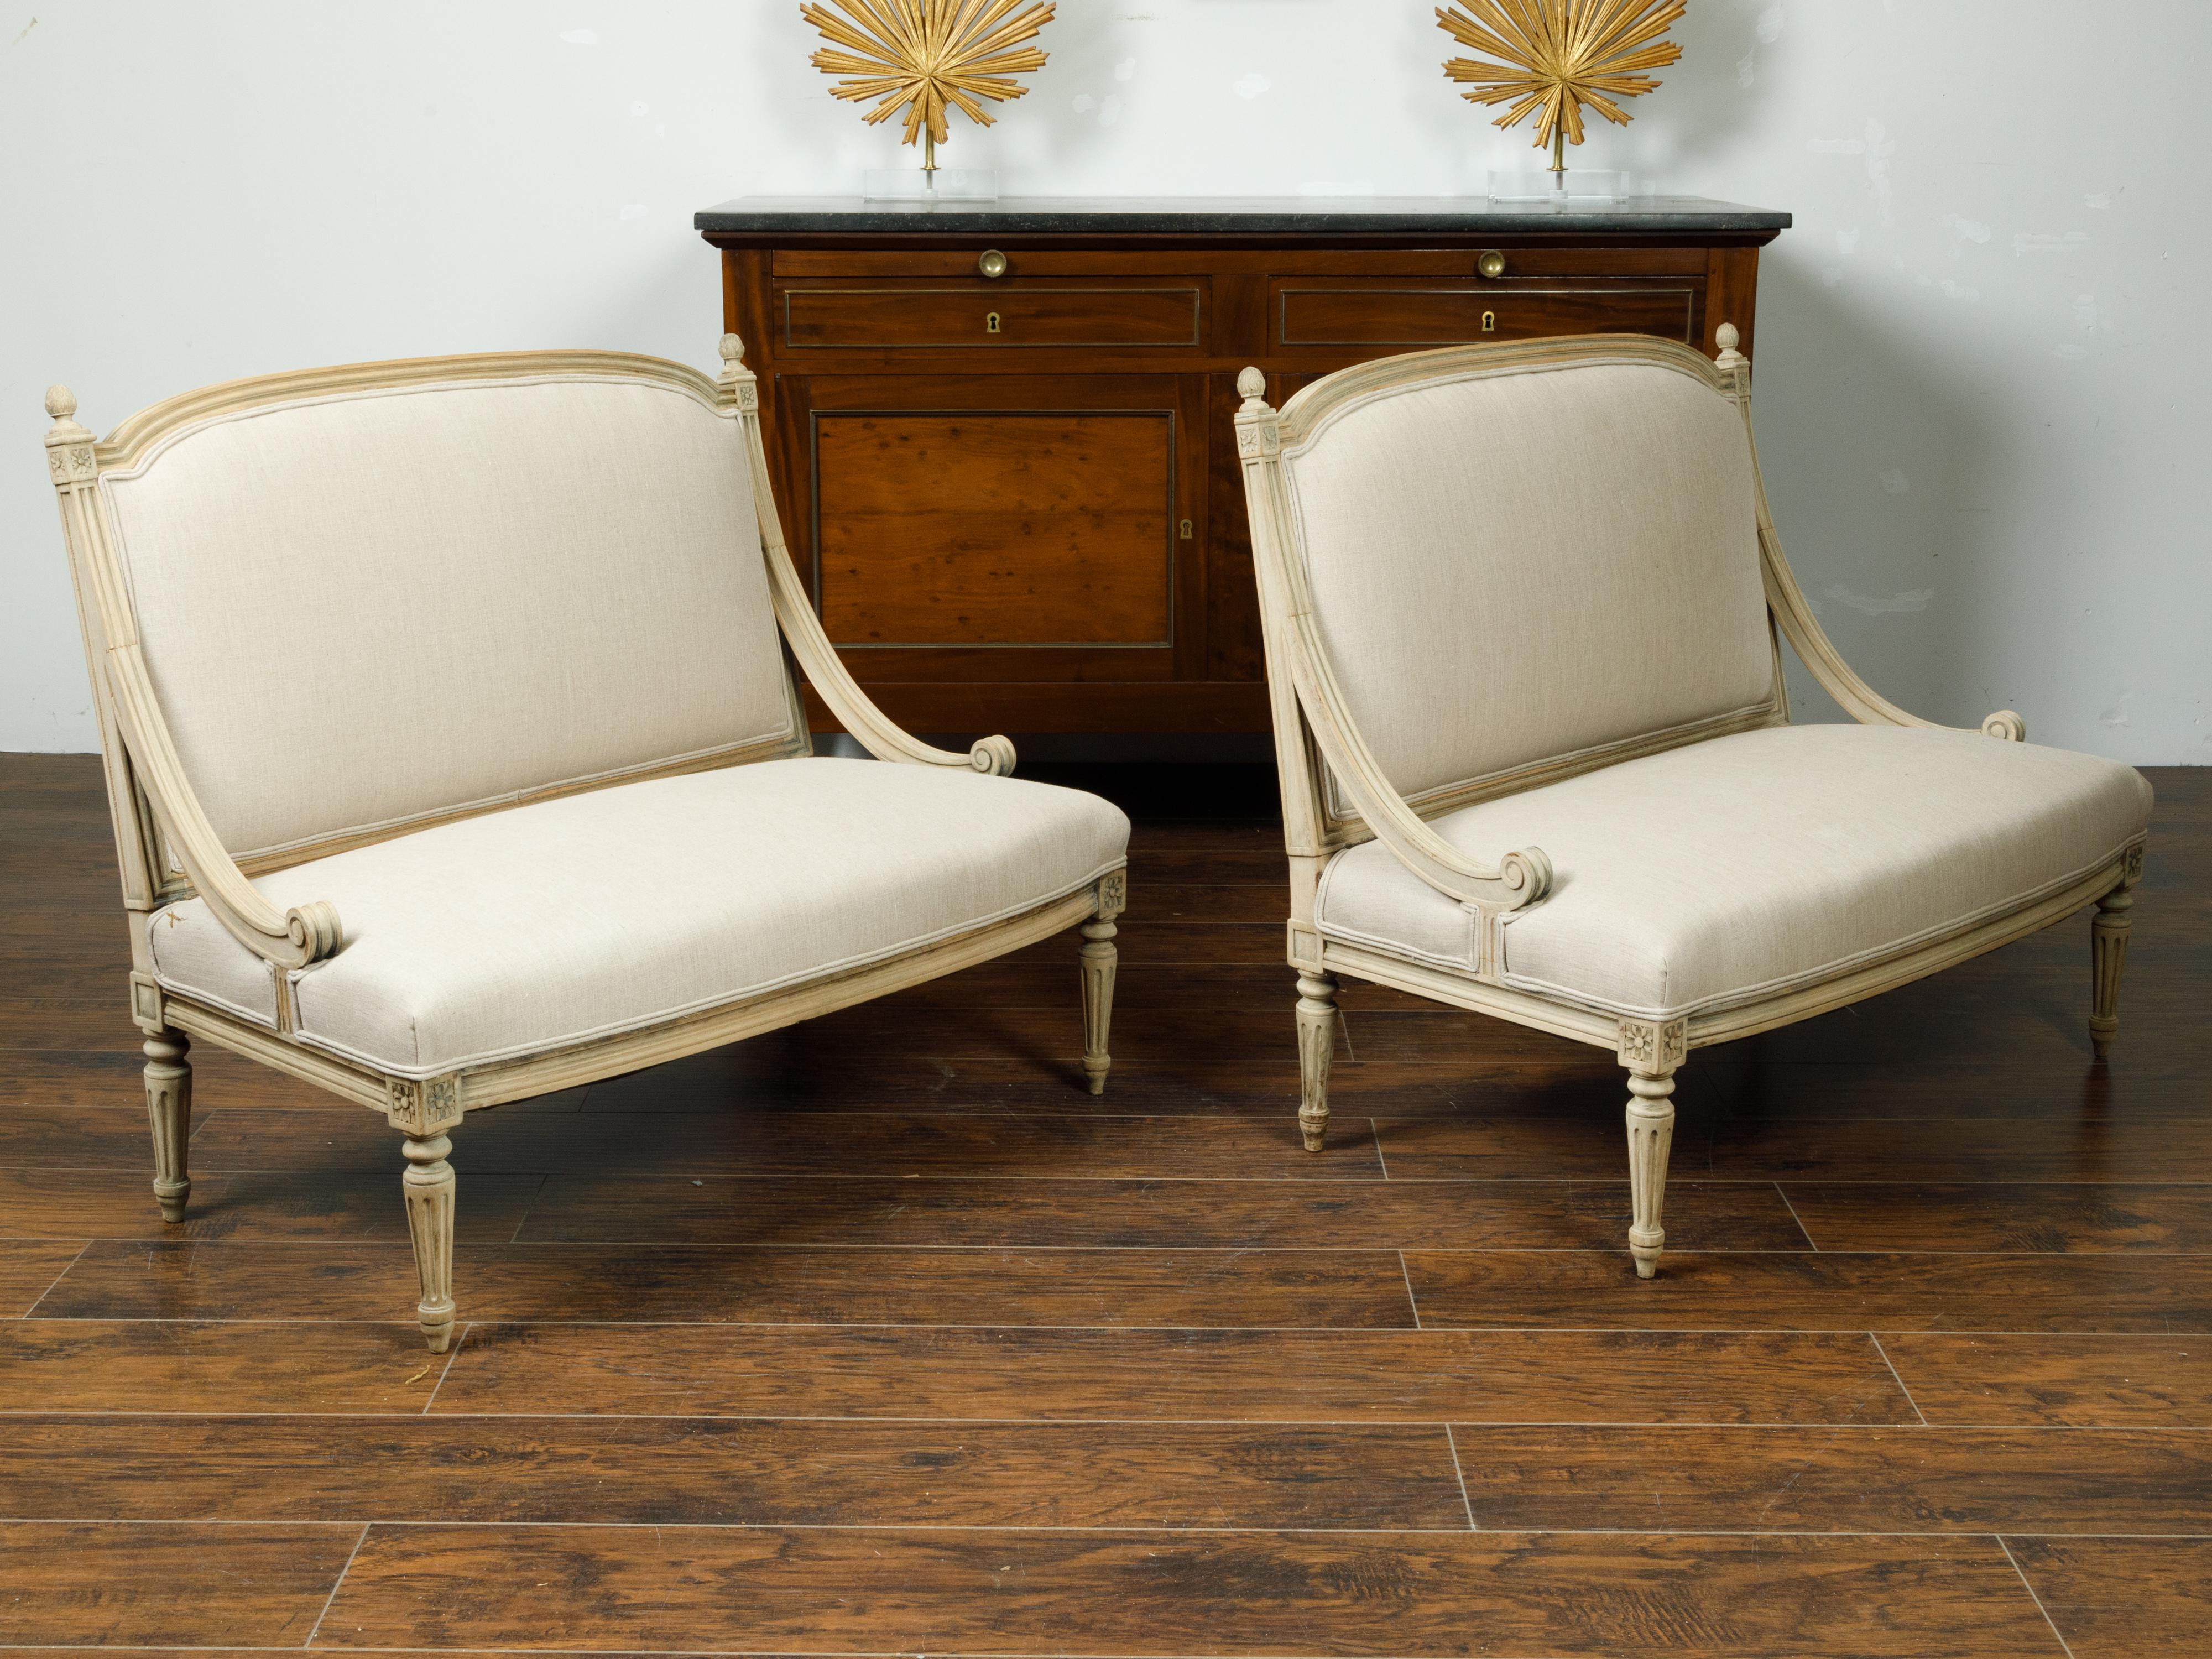 Upholstery Pair of French 1900s Louis XVI Style Walnut Settees with Scrolling Arm Supports For Sale